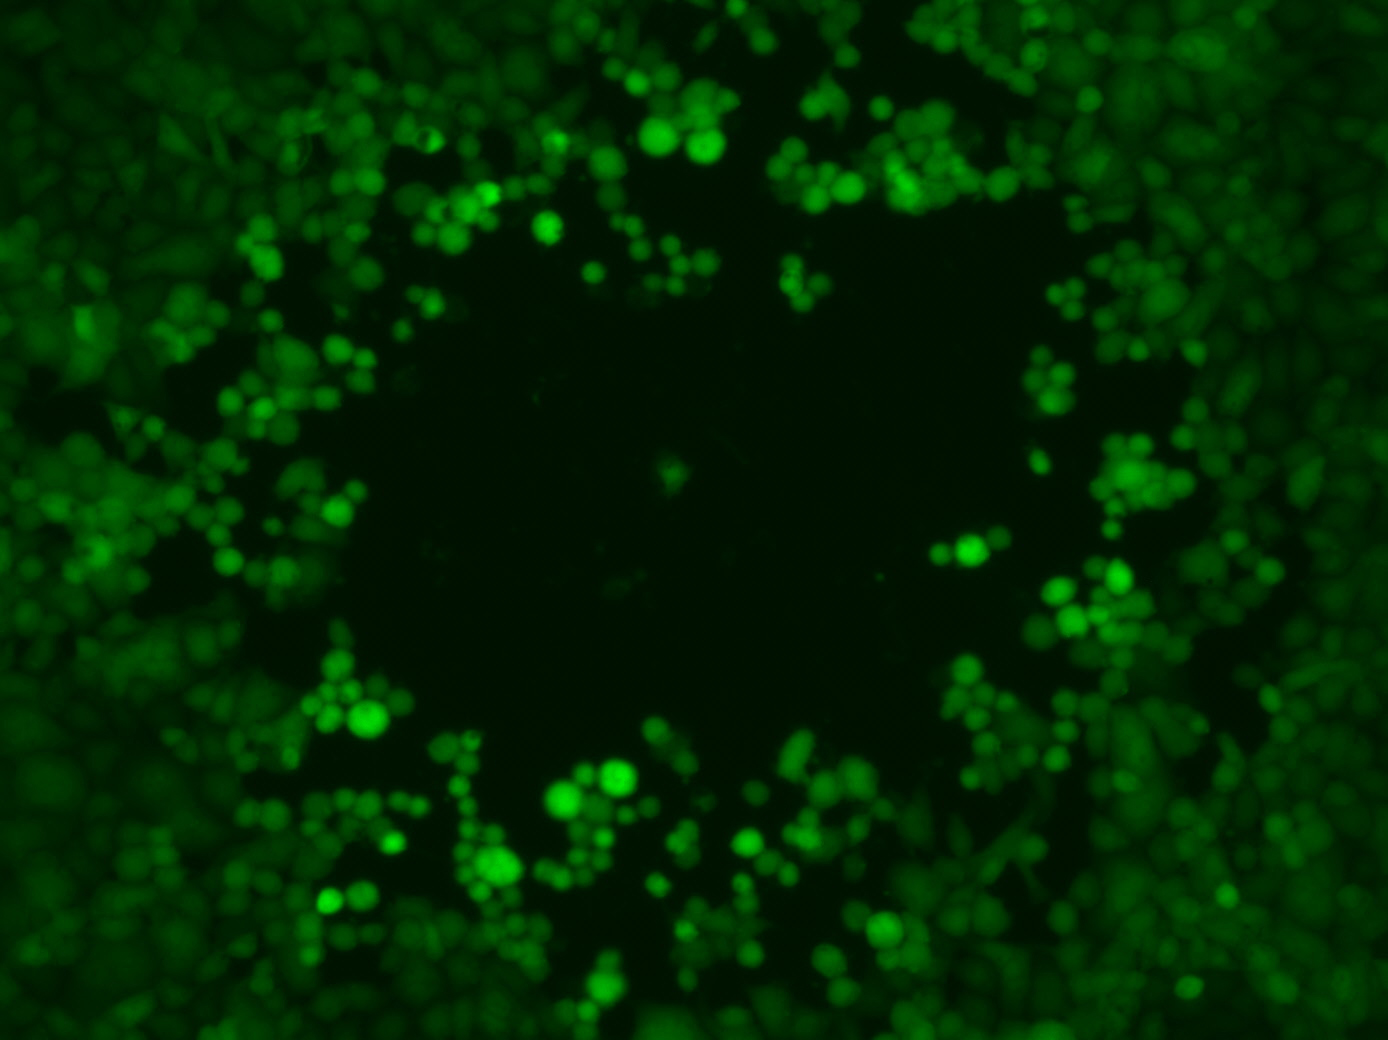 Plaque formation of cell culture cells by an engineered, green fluorescent herpes simplex virus 1